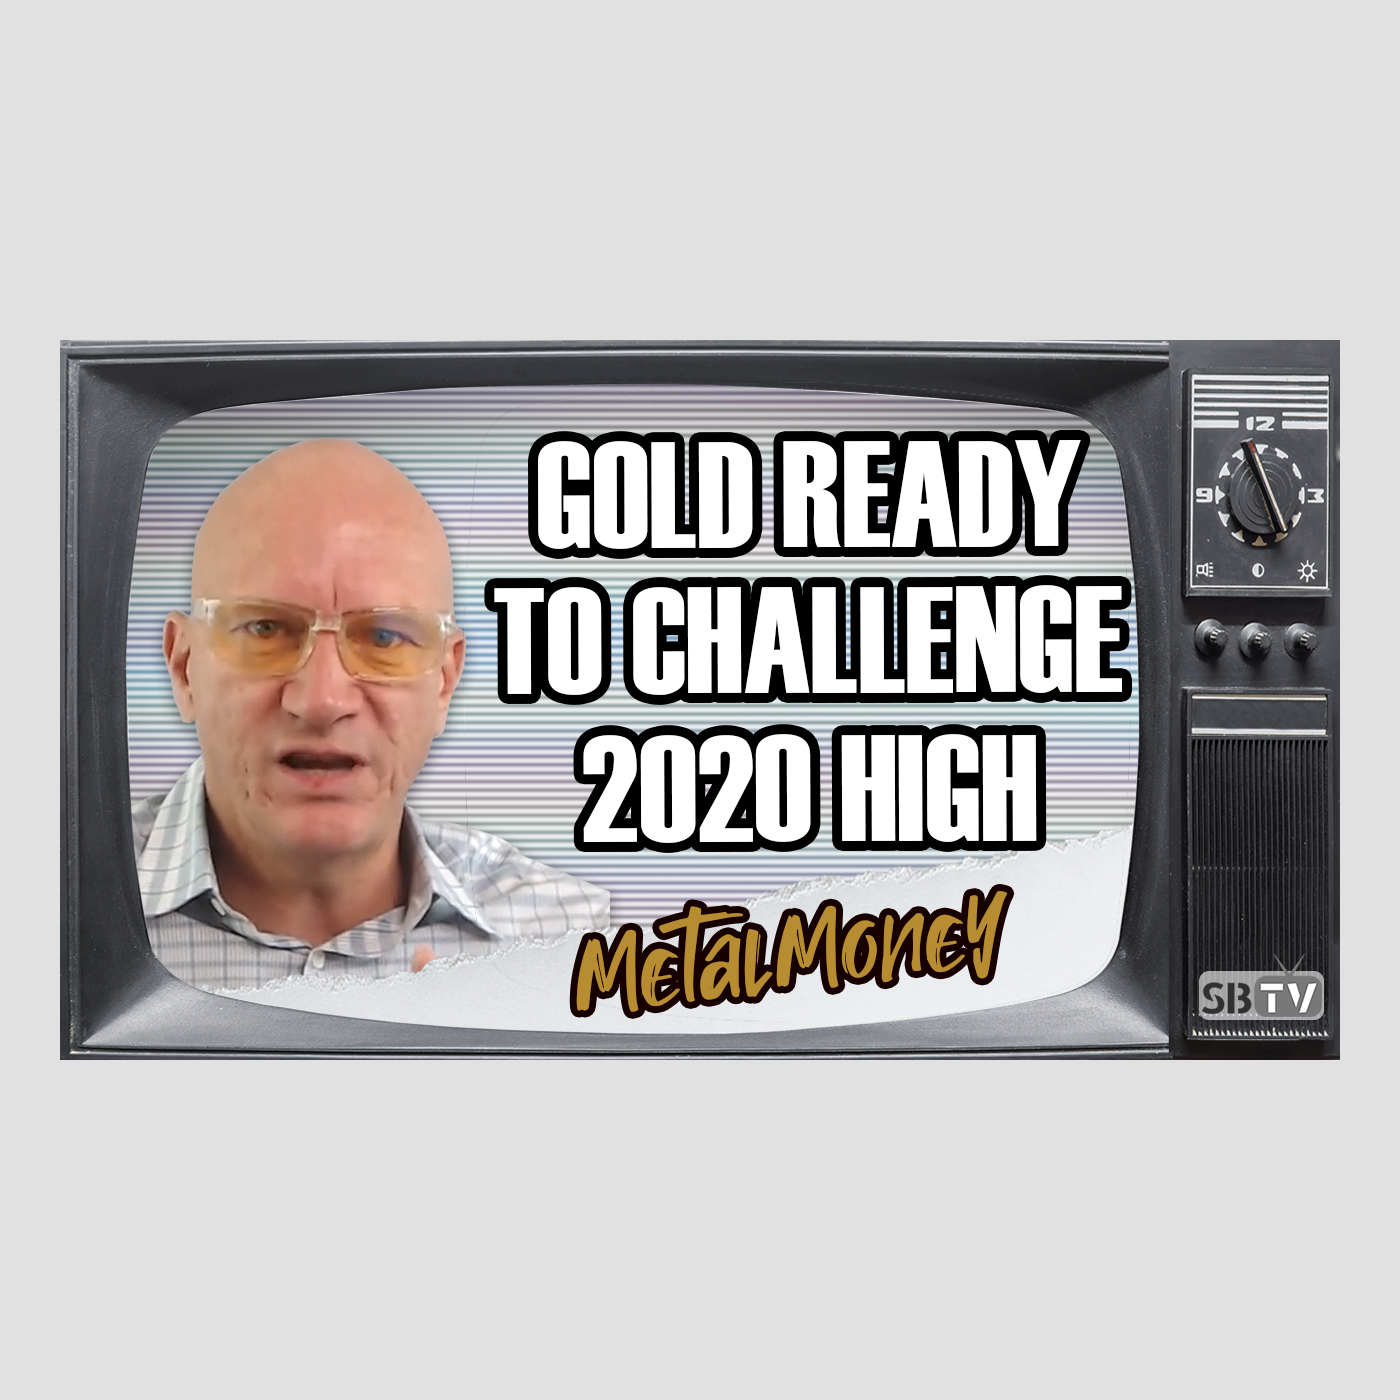 MM57 Francis Hunt: Gold Ready to Rechallenge Its 2020 Record High This Year